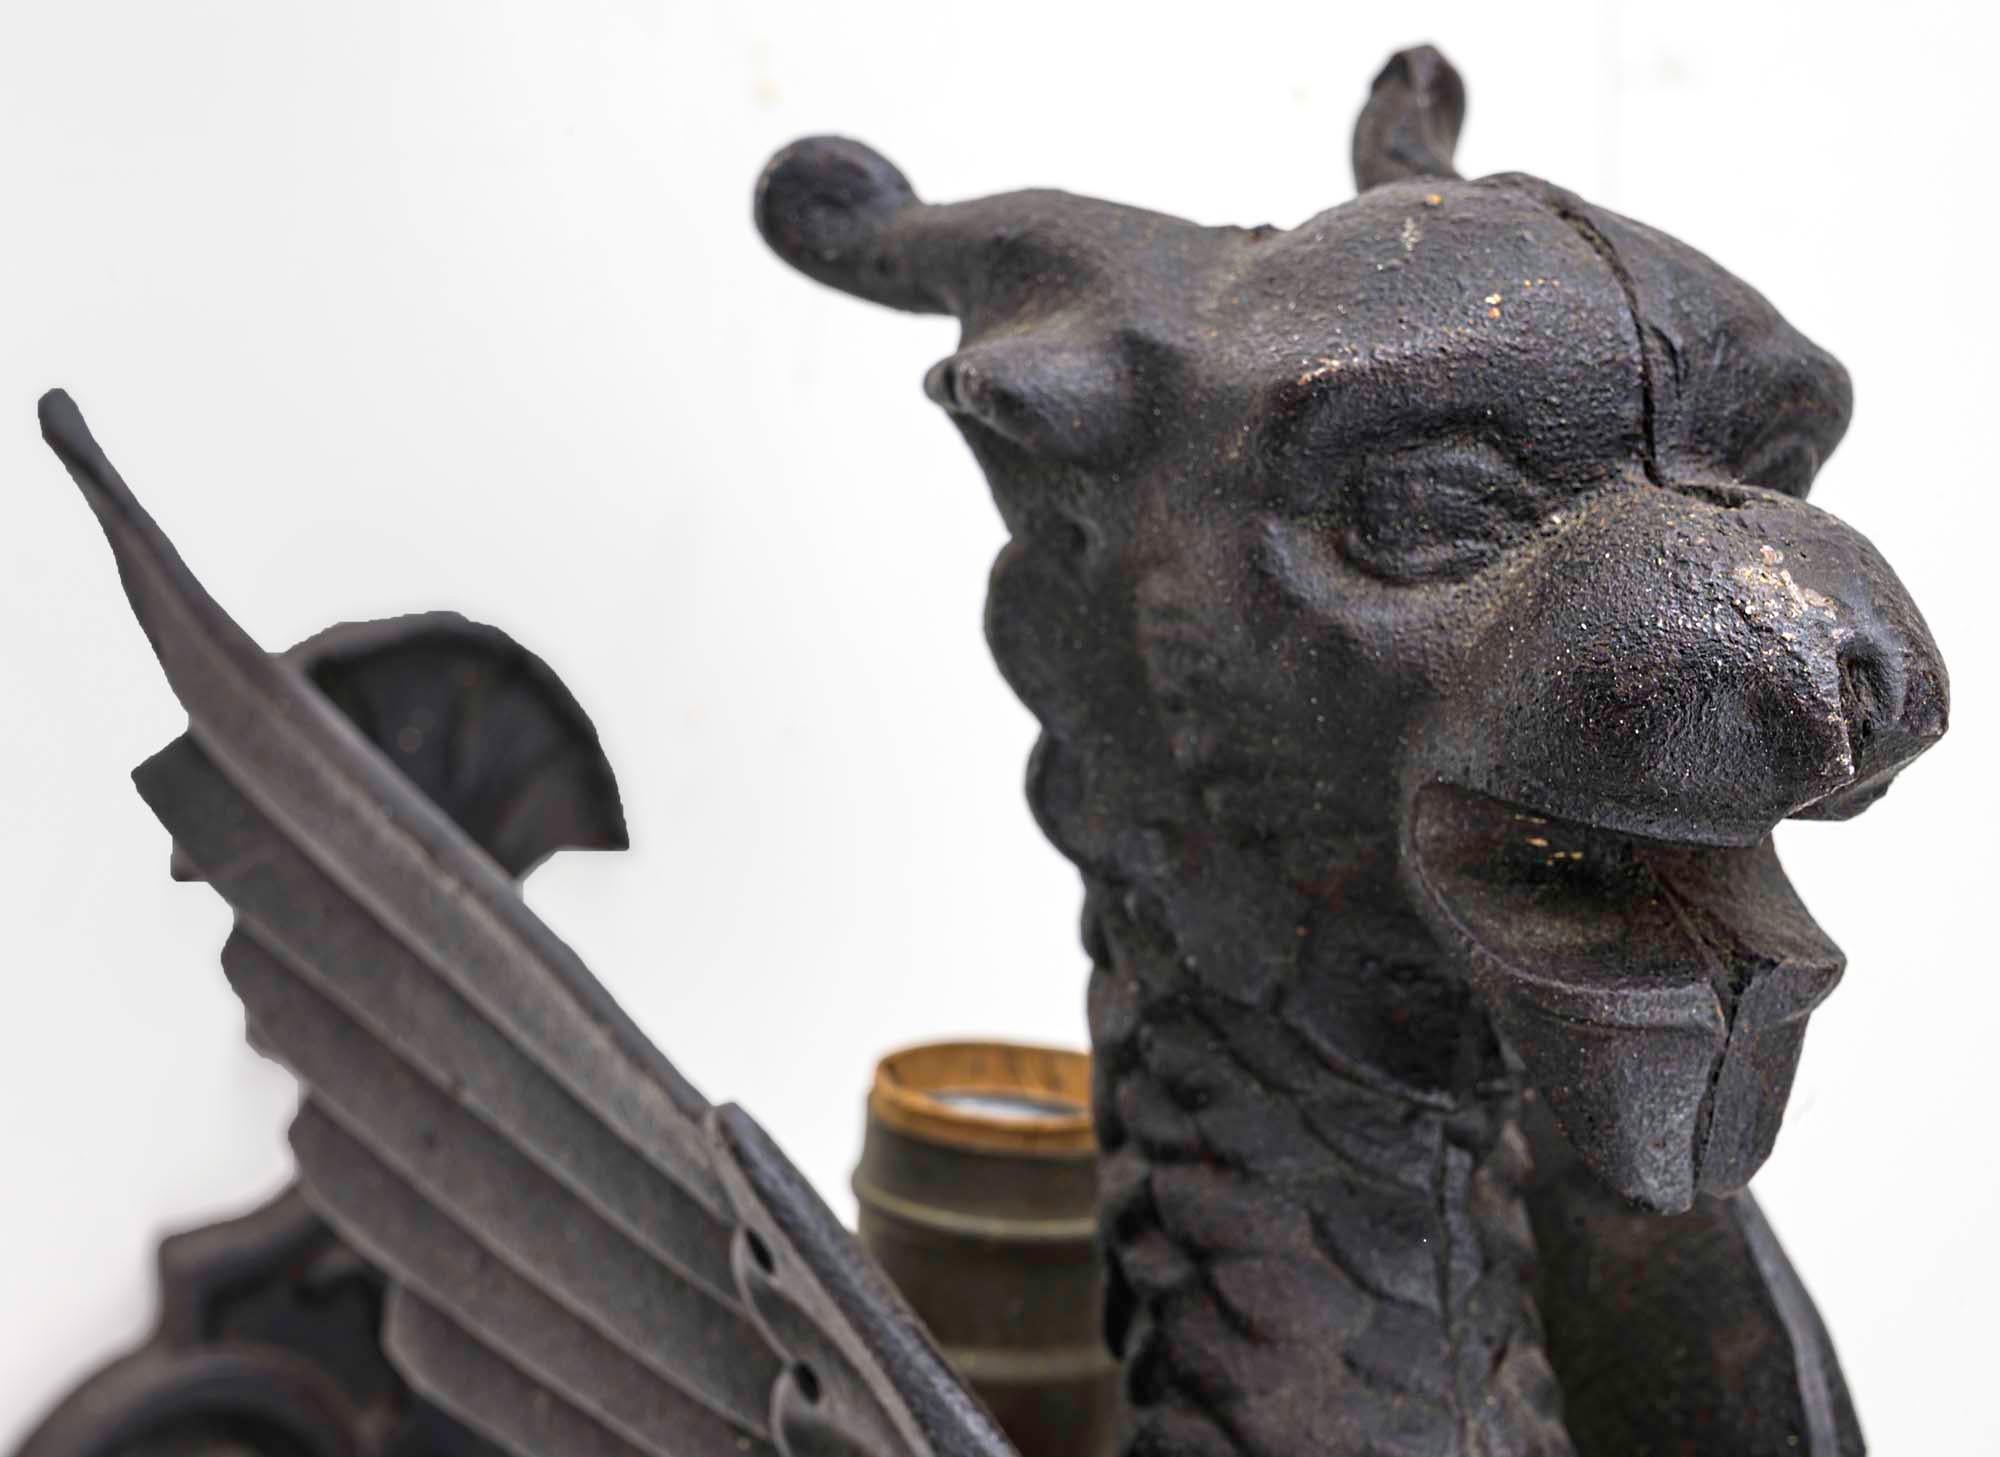 Large iron griffon wall sconce. Handsome winged lion, mythological creature cast in iron.
Very well detailed with fierce face to ward off evil spirits.
Electrified, light coming from between the two wings. About 22” high.